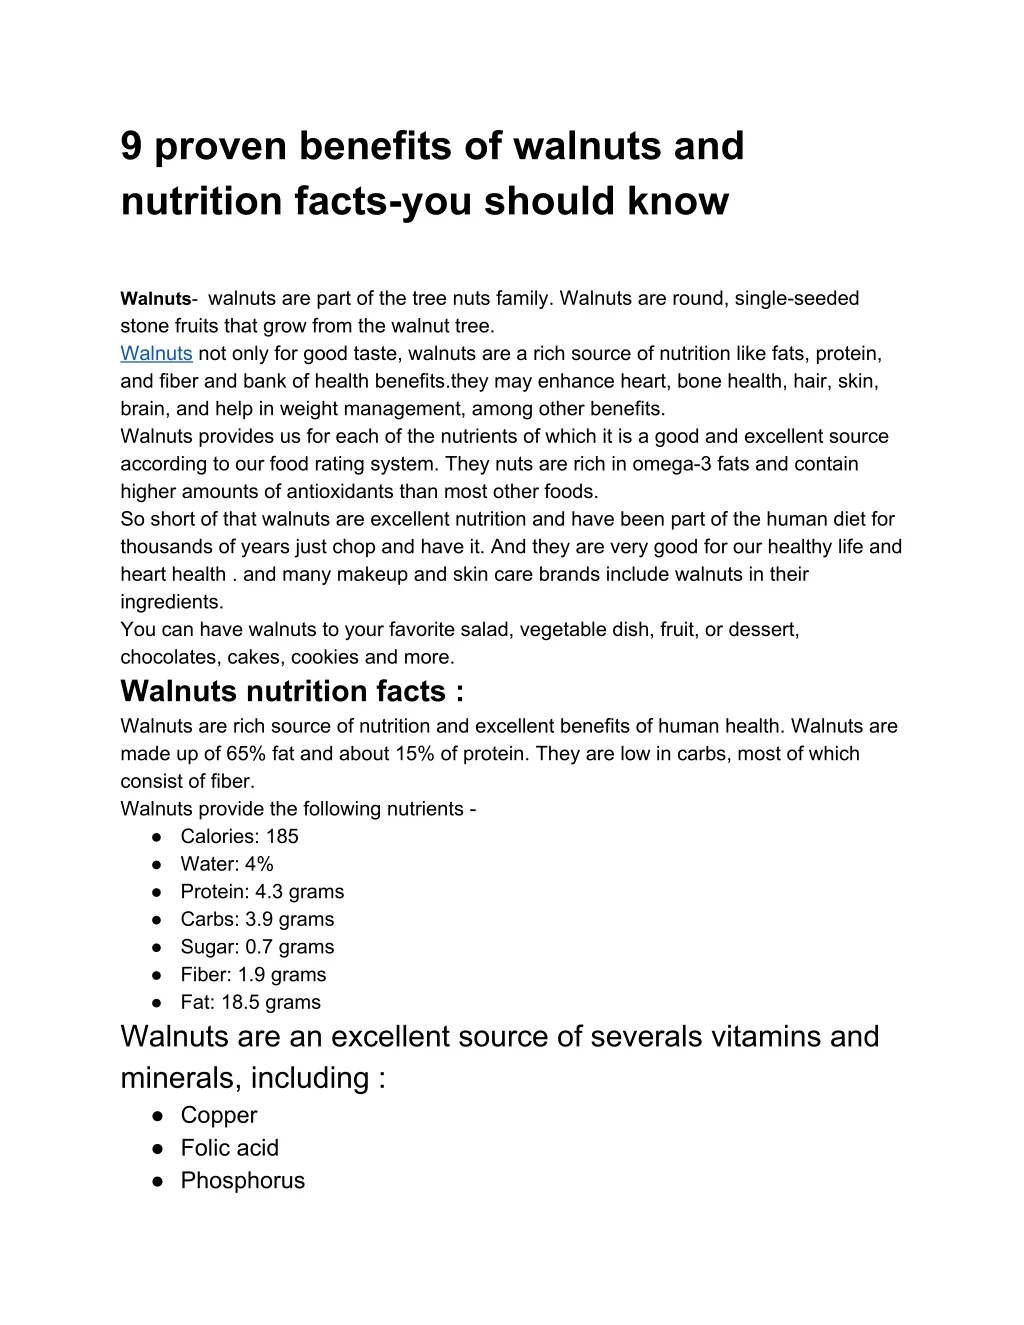 9 proven benefits of walnuts and nutrition facts